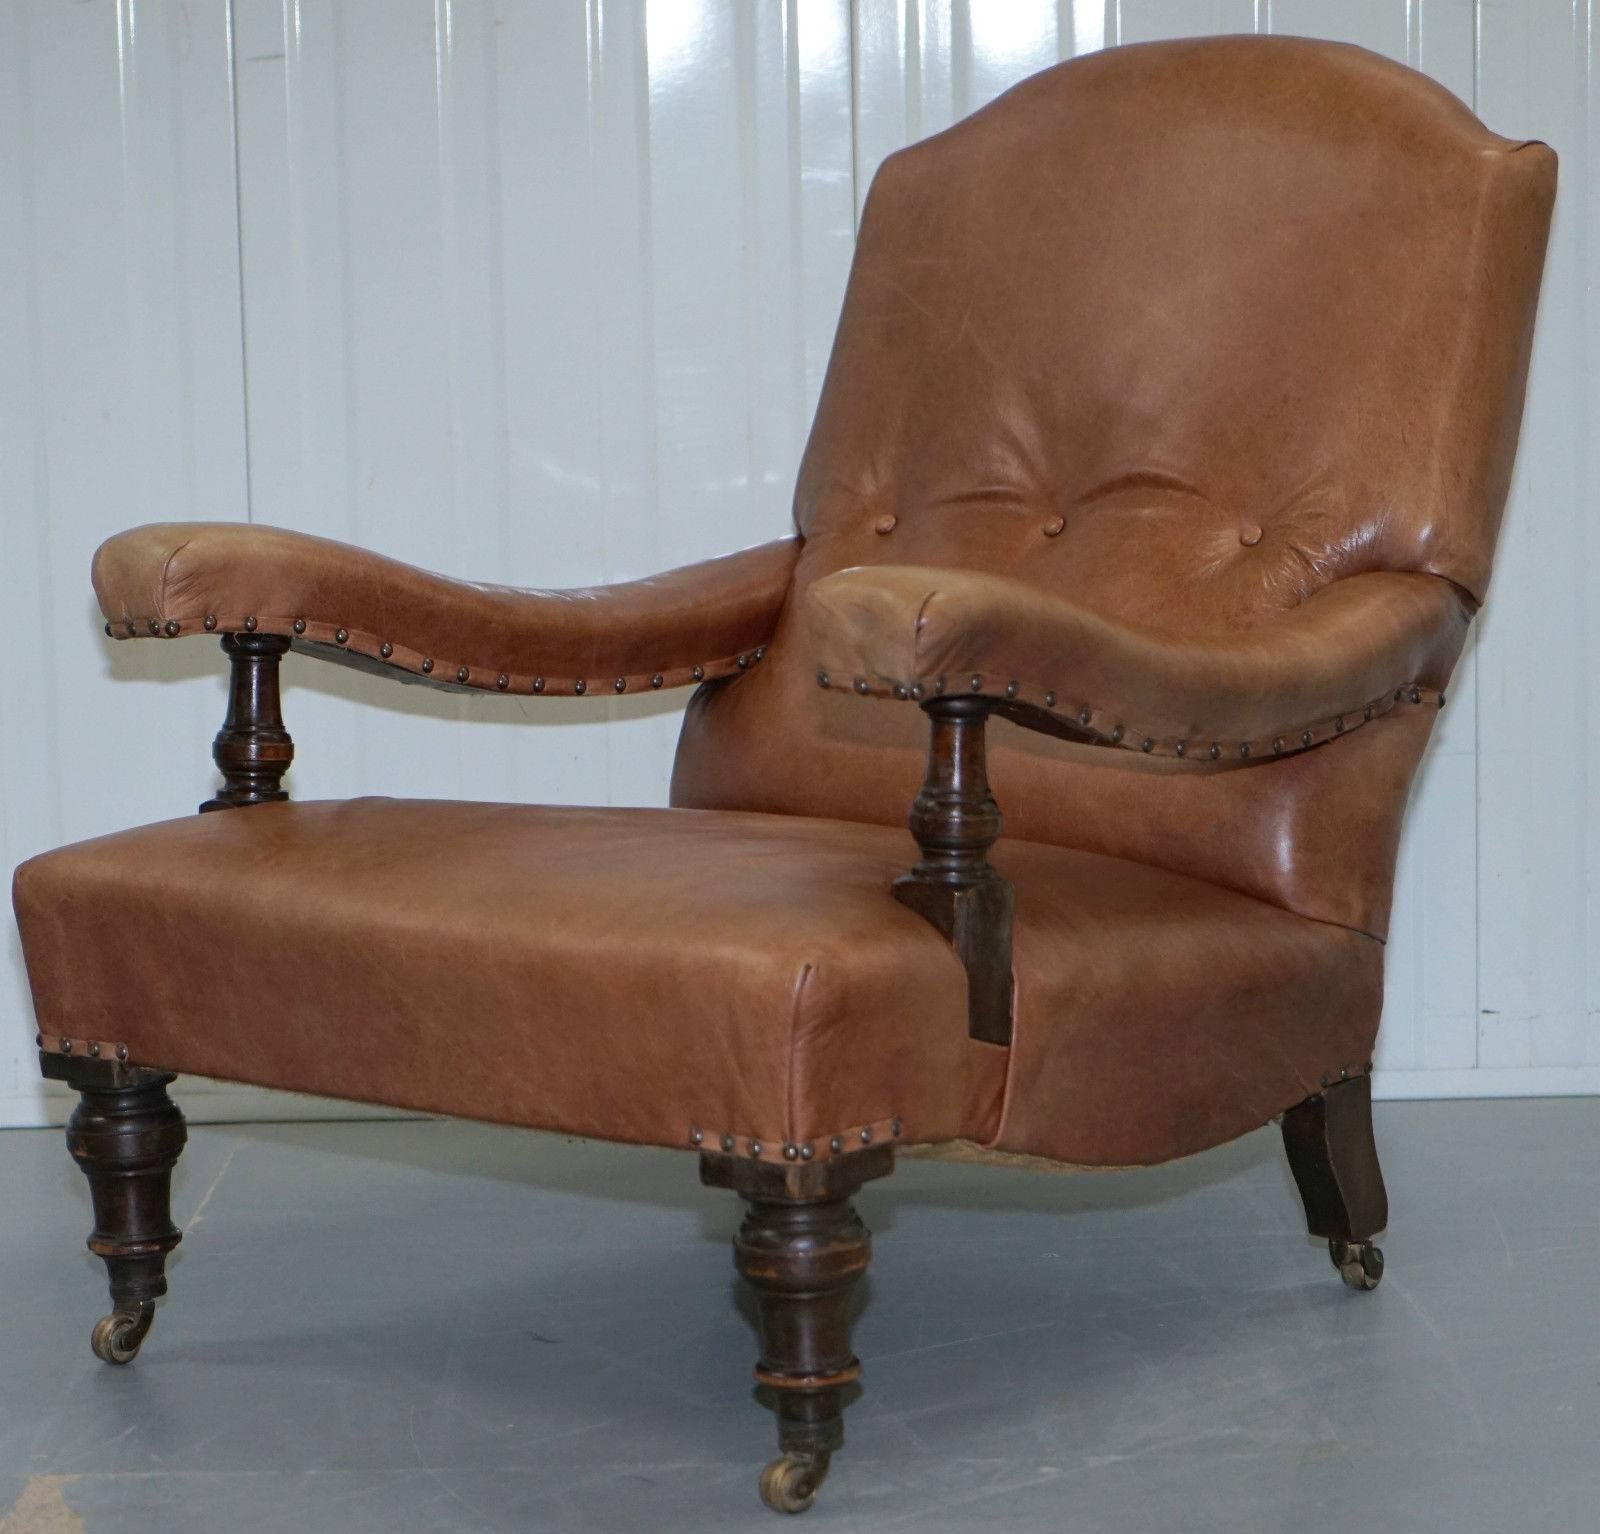 Antique & Vintage furniture Wimbledon

We are delighted to offer for auction this stunning fully restored very rare Edwardian circa 1900 Library reading Gentleman’s club armchair

Please note the delivery fee listed is just a guide, for an accurate